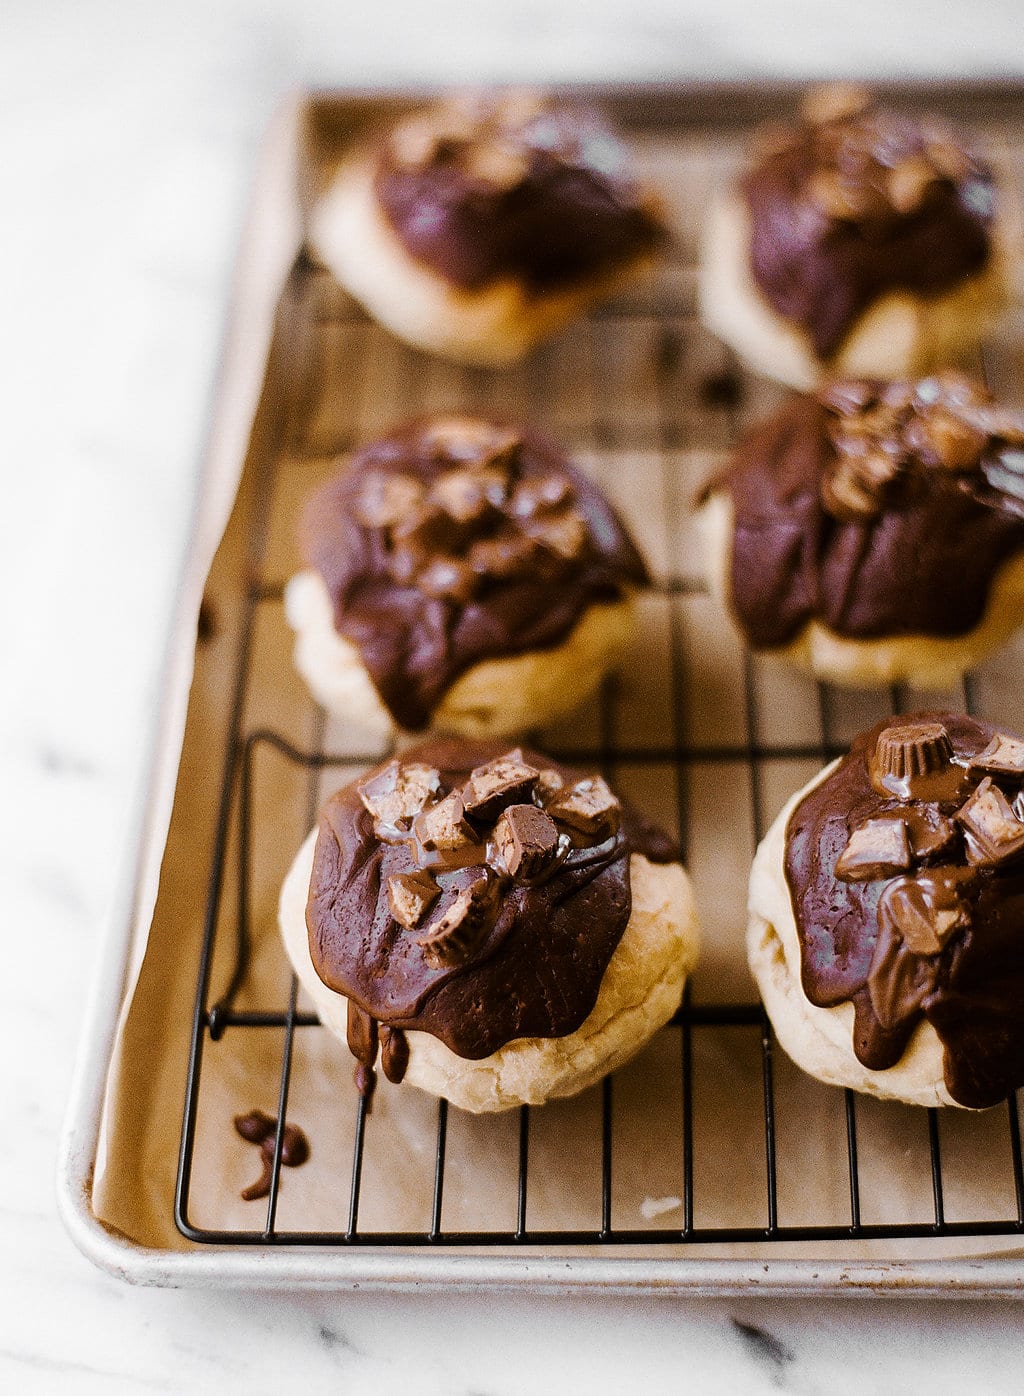 Peanut Butter Cup Baked Doughnuts featured a yeast risen fluffy baked doughnut base filled with peanut butter cream cheese and coated with chocolate glaze. Every bite is pure chocolate peanut butter HEAVEN! *No frying involved*